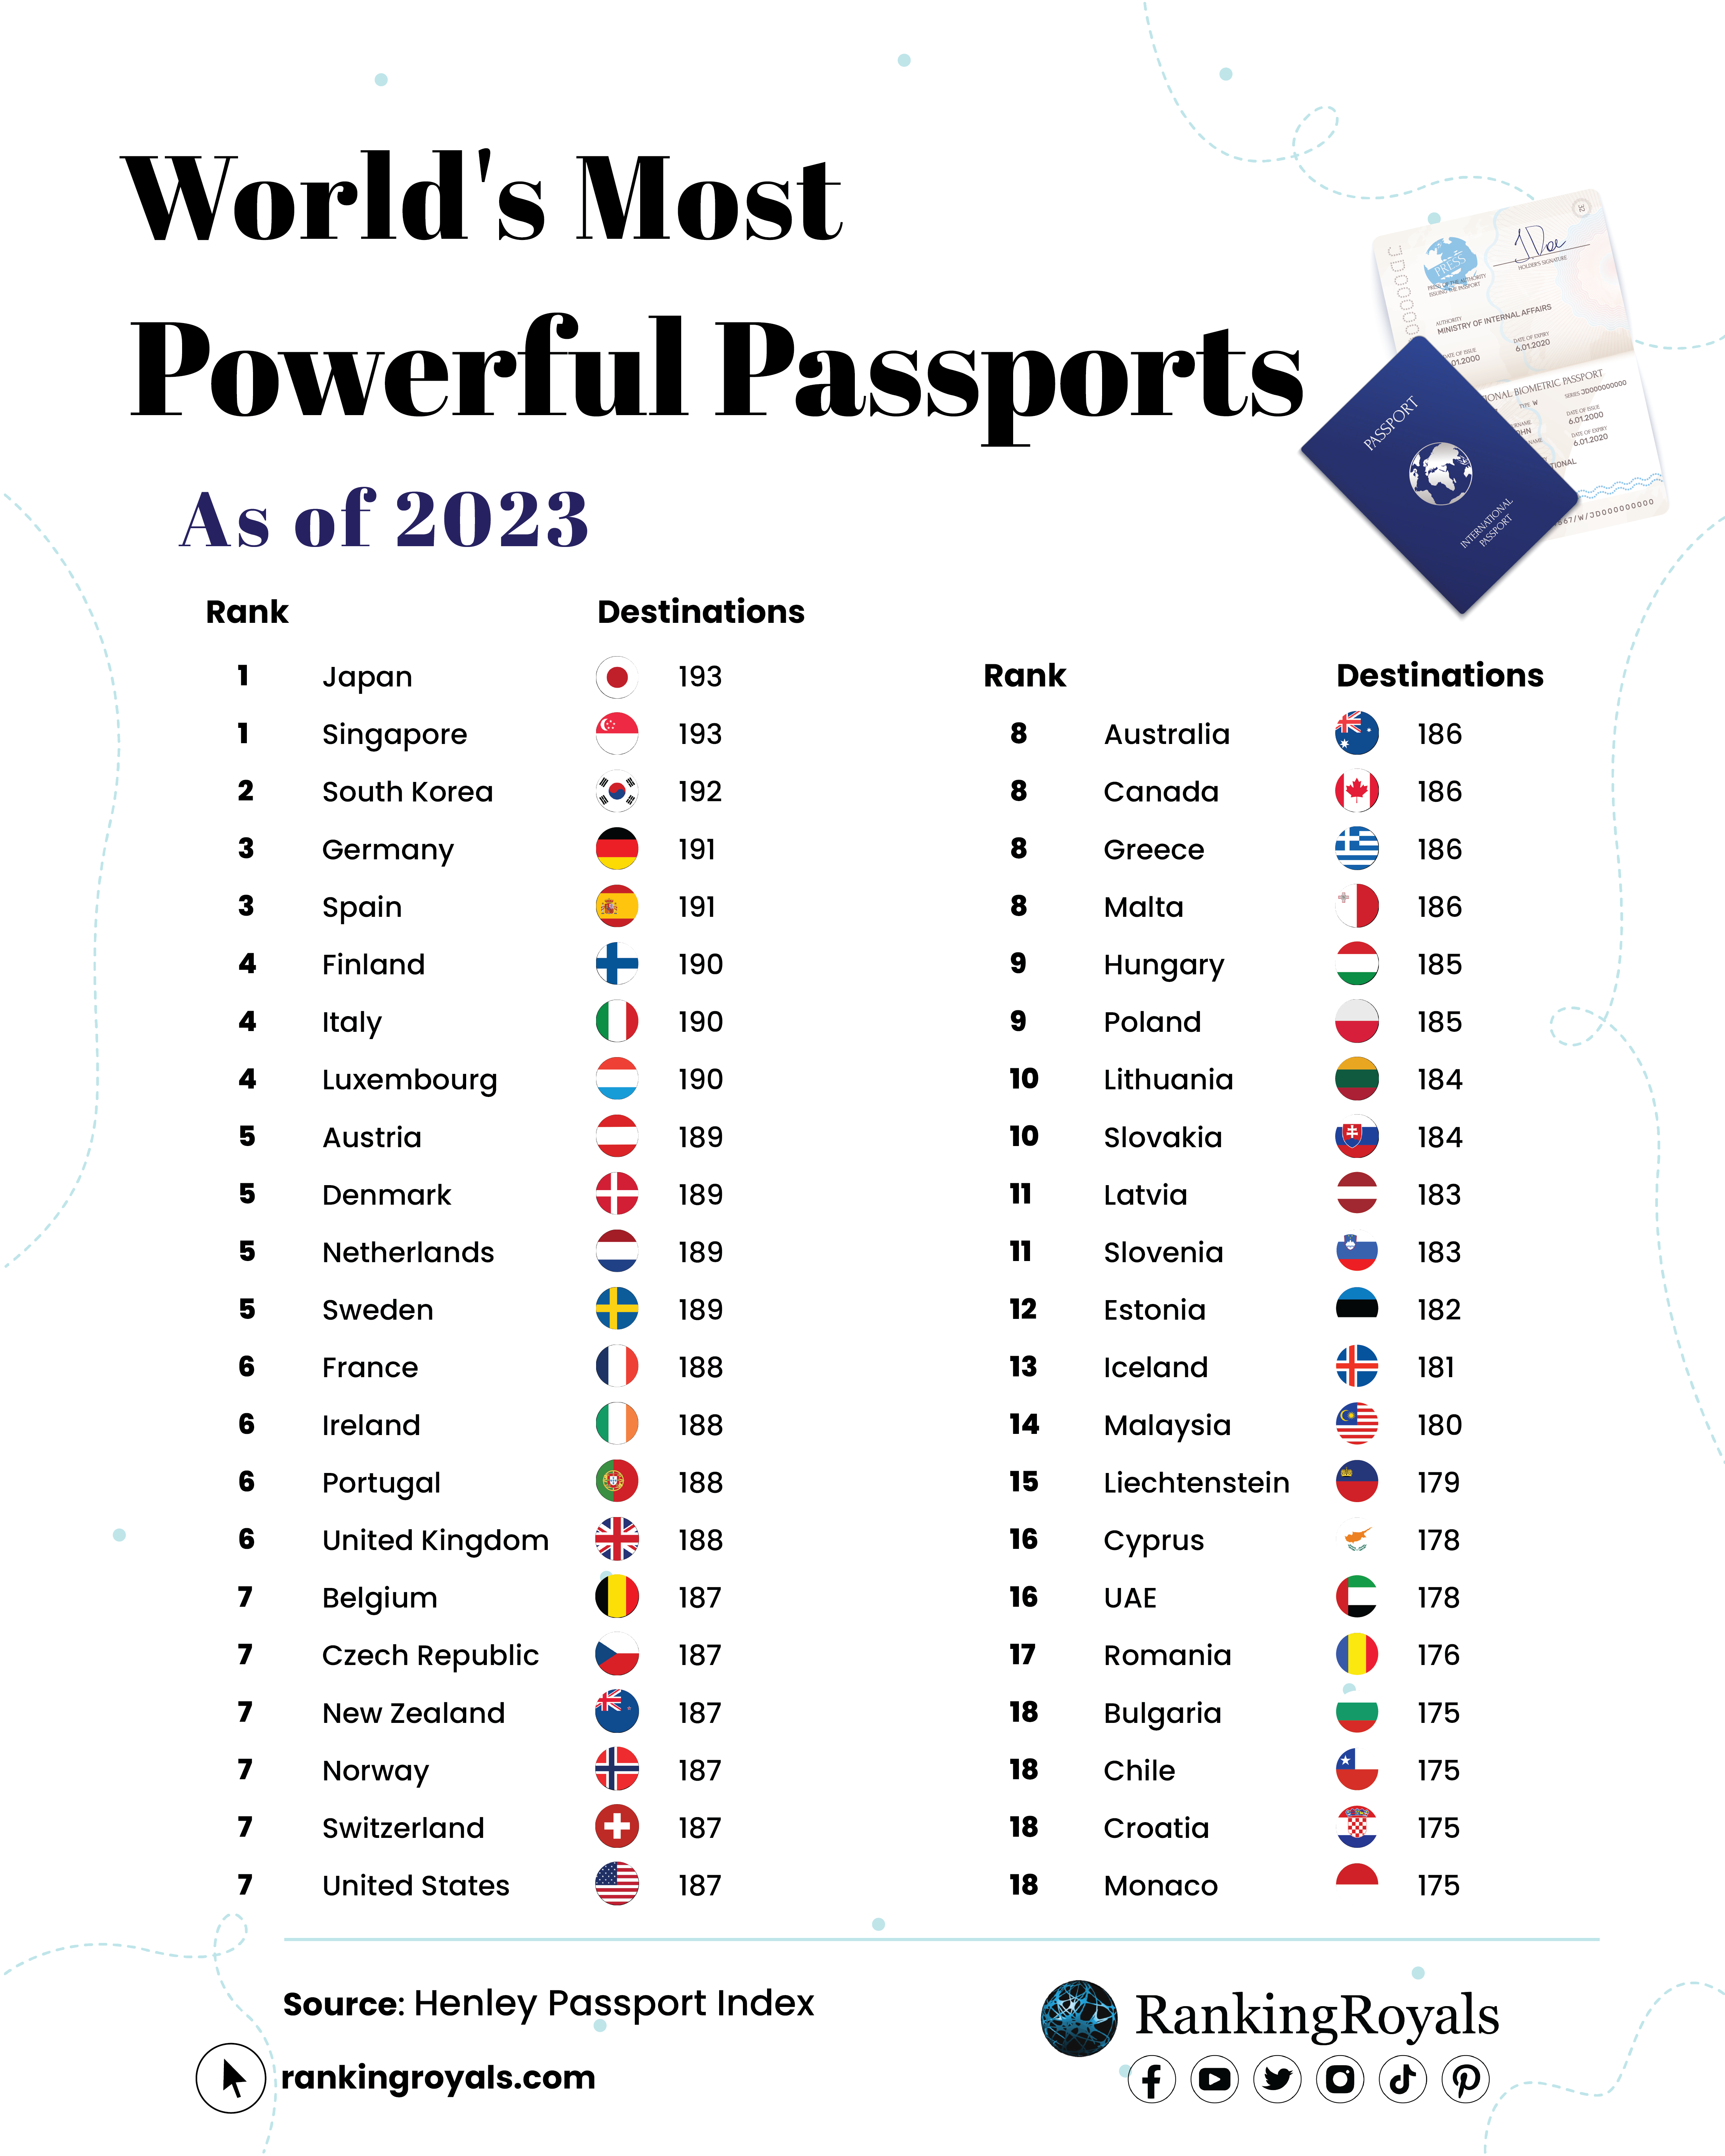 What is the 2 strongest passport in the world?